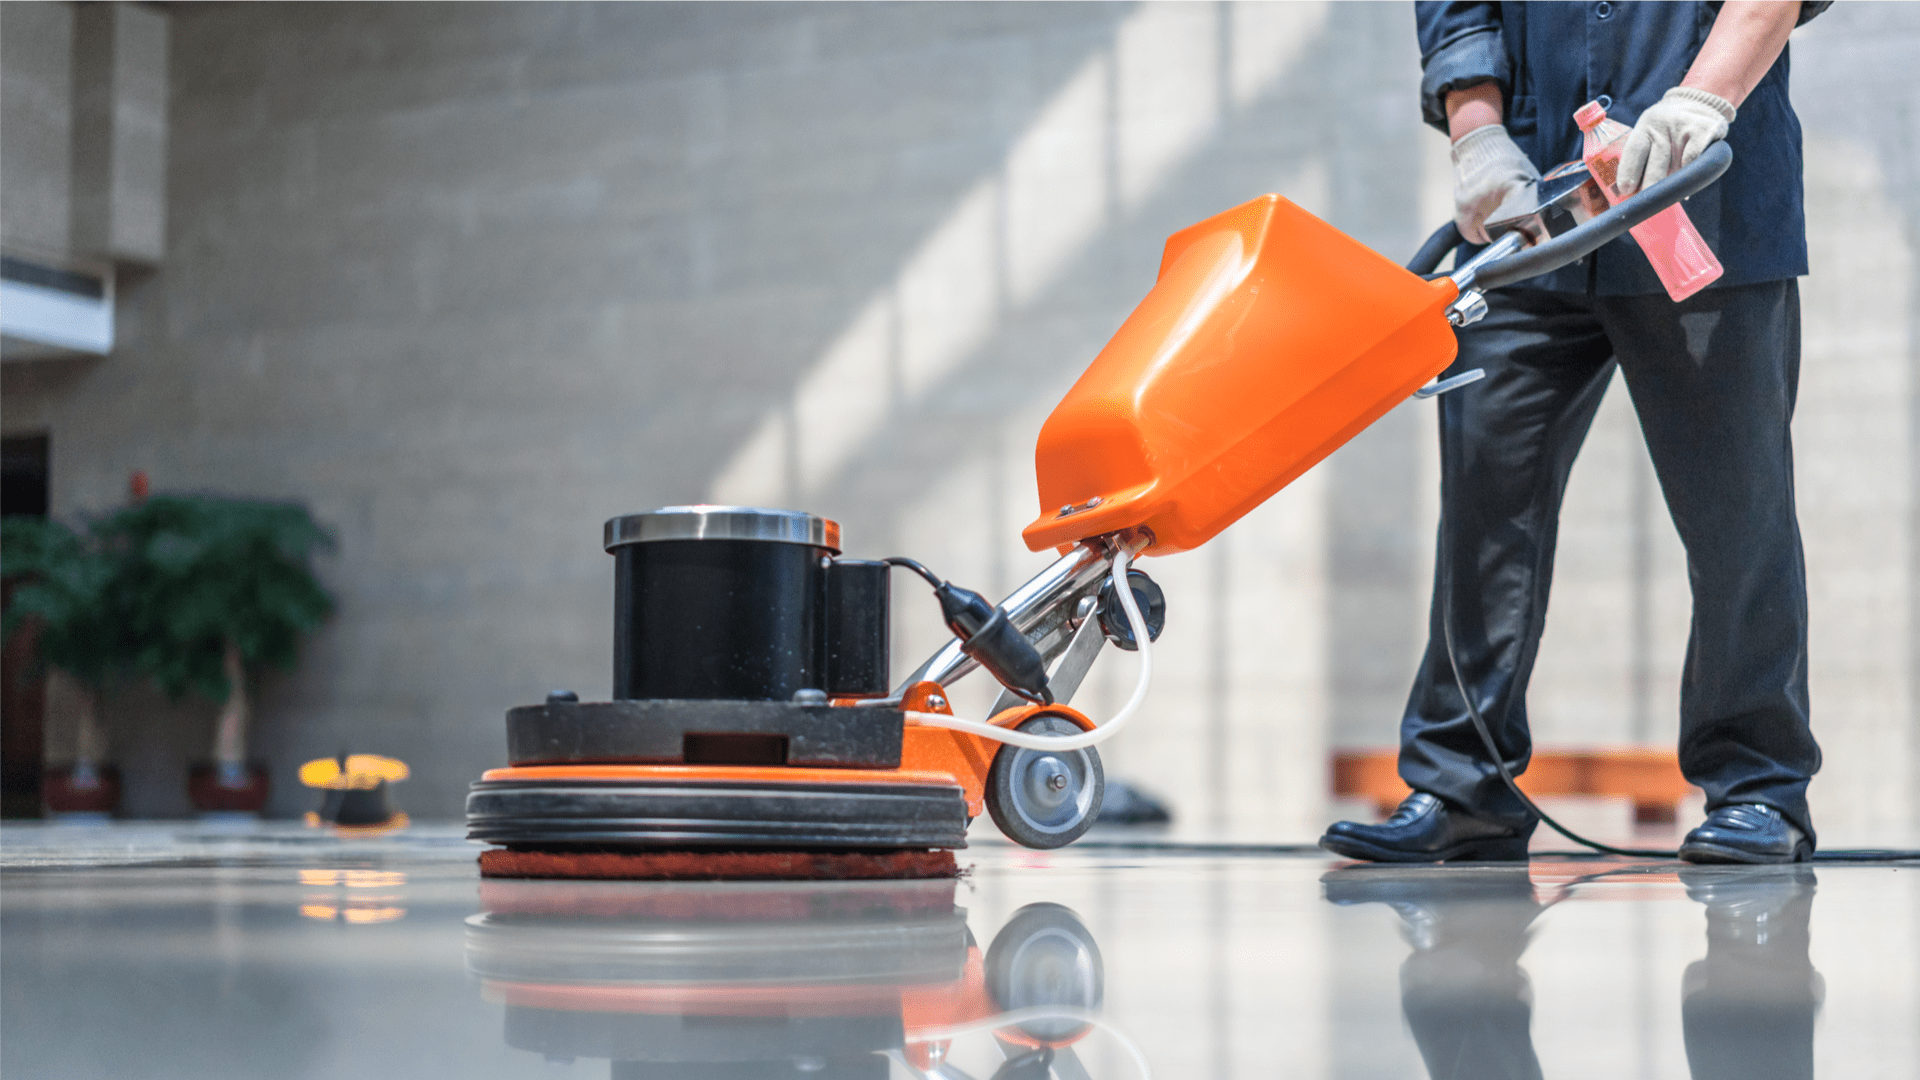 commercial floor care and cleaning service equipment